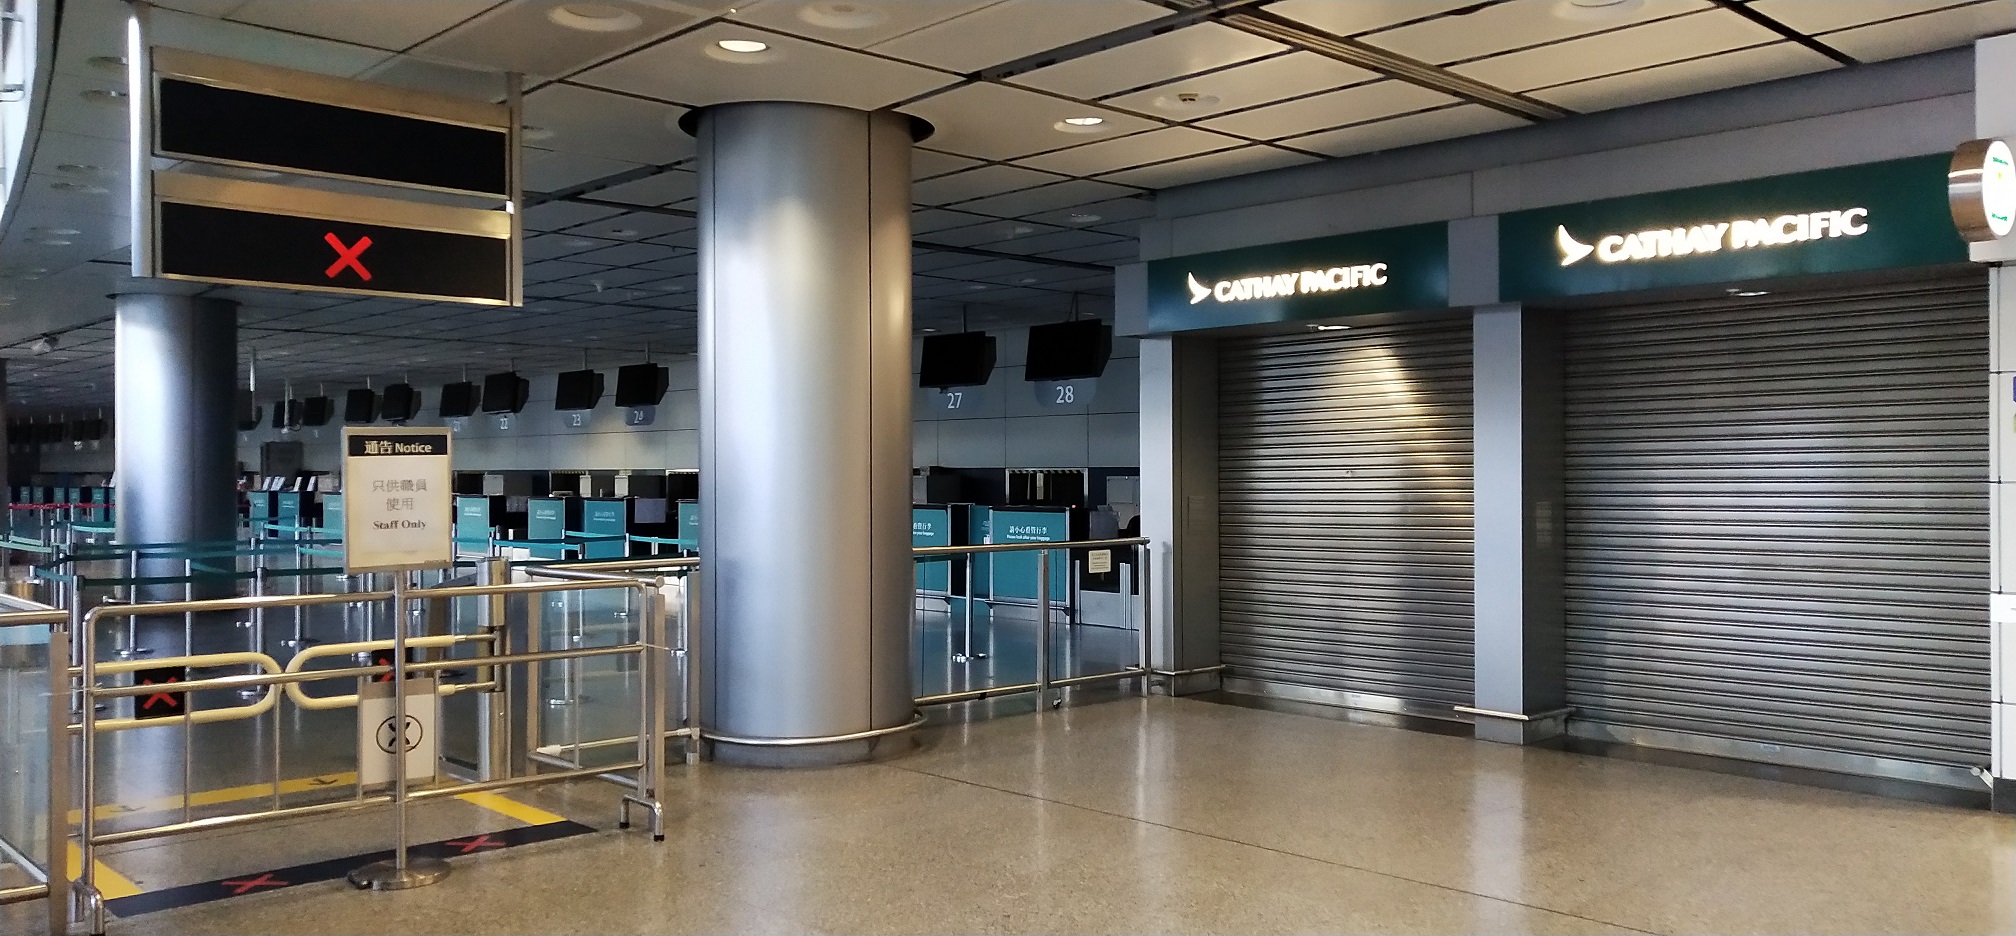 Cathay Pacific customer service center at Hong Kong Airport Express Station closes under Covid-19 due to the stop of in-city check in.